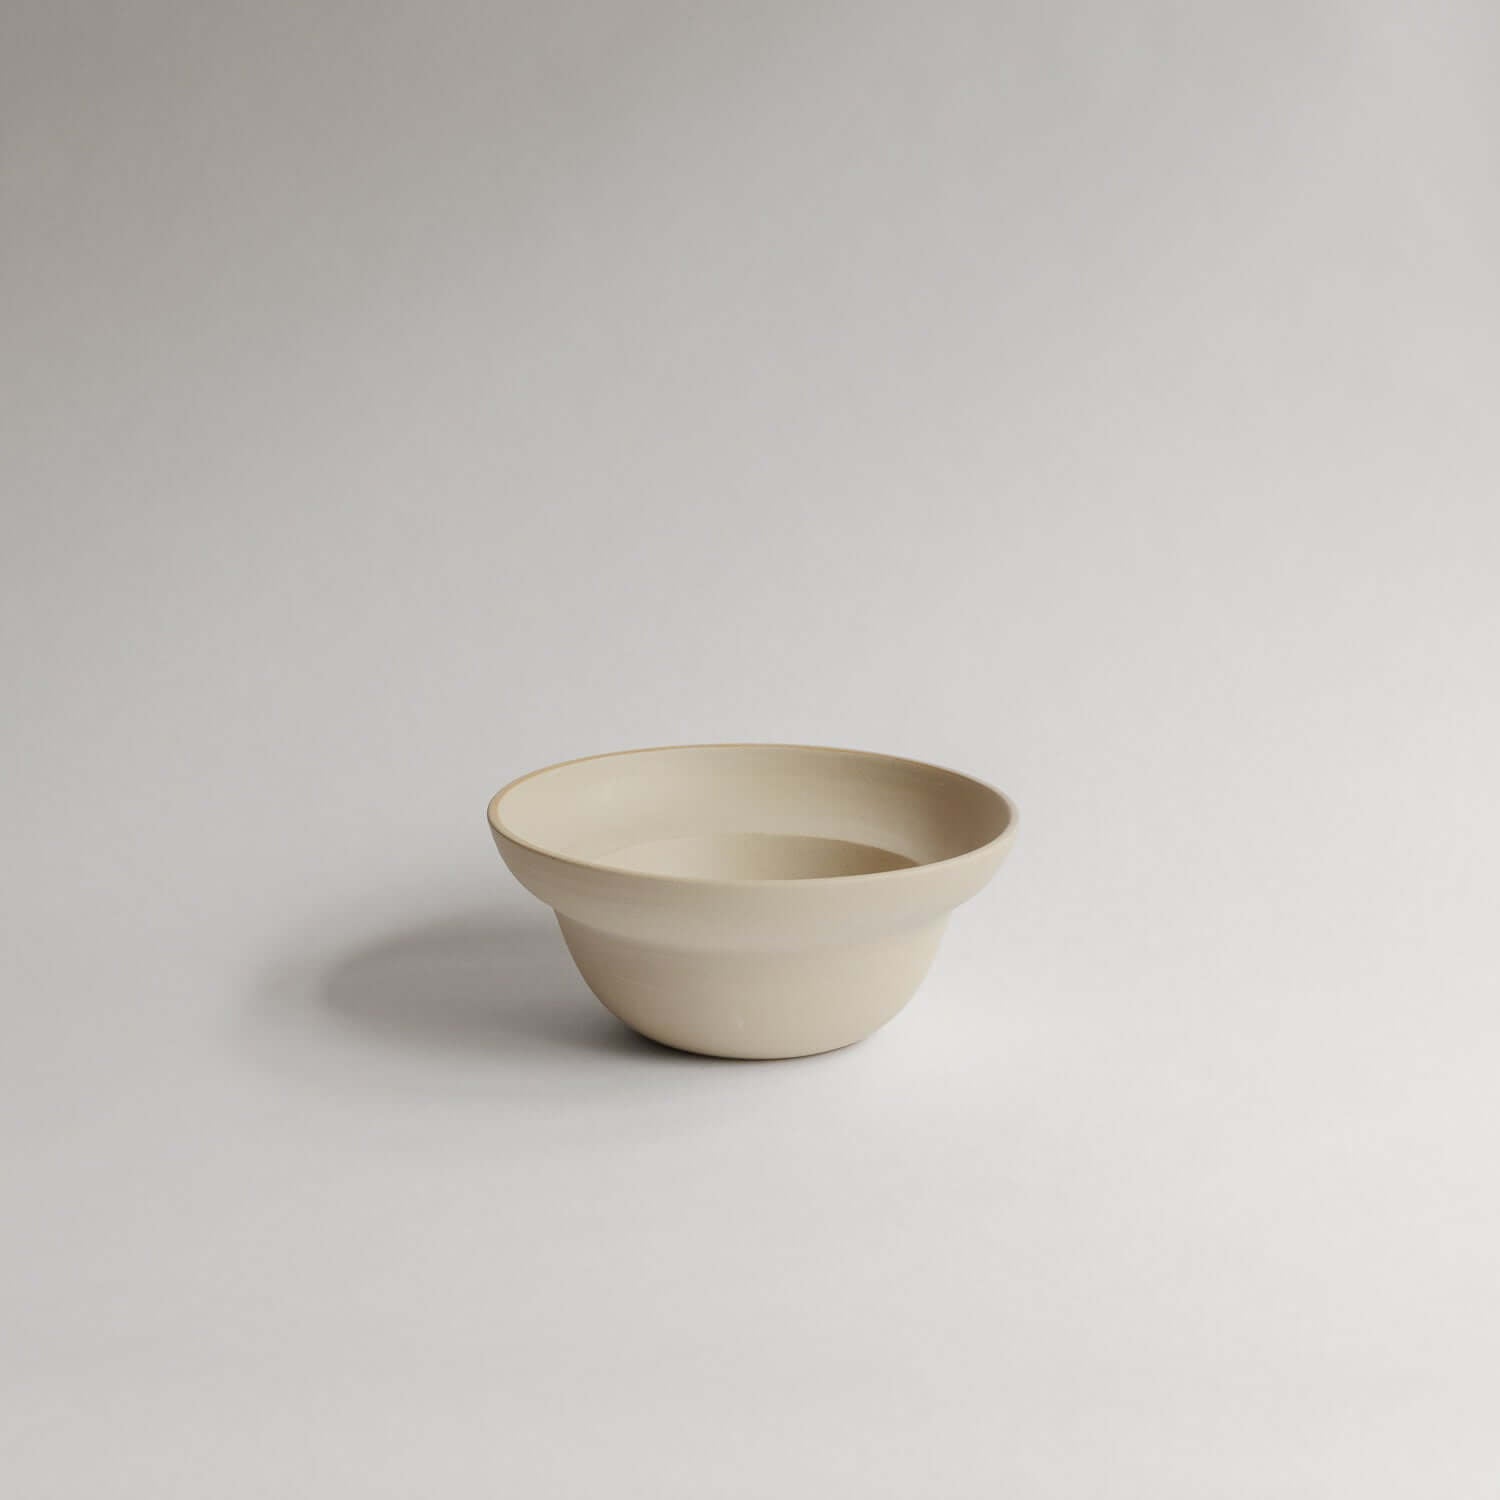 Unique Neo Bowl in grey stoneware, 600ml. Hand-crafted with love, featuring raw exterior and matte glaze. Perfect mix of art and utility. von viola beuscher ceramics